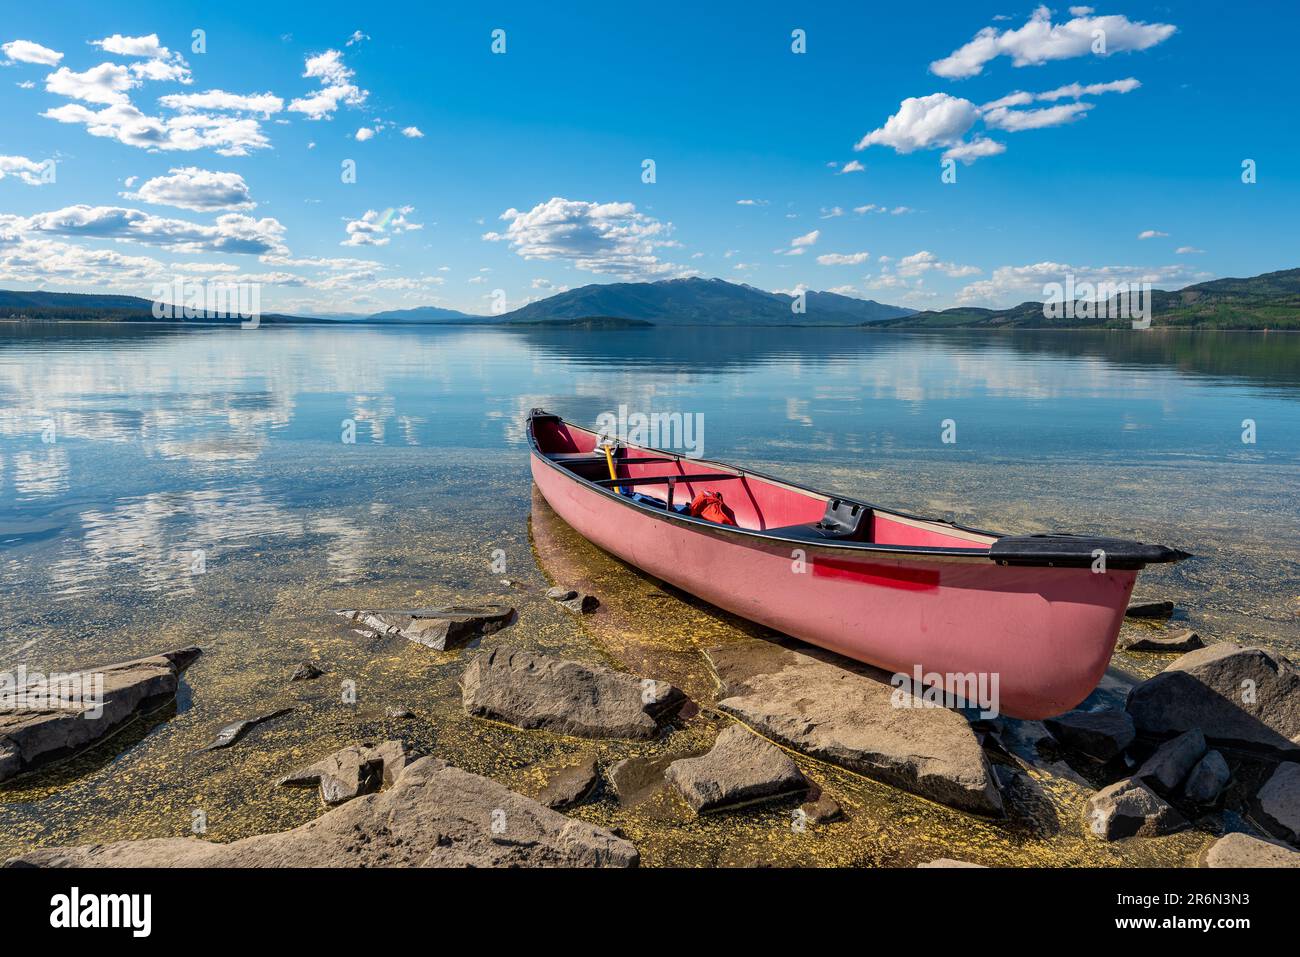 Red canoe sitting aside a rocky lake side on a beautiful blue sky summer day in northern Canada with mountains reflecting in the calm water below. Stock Photo